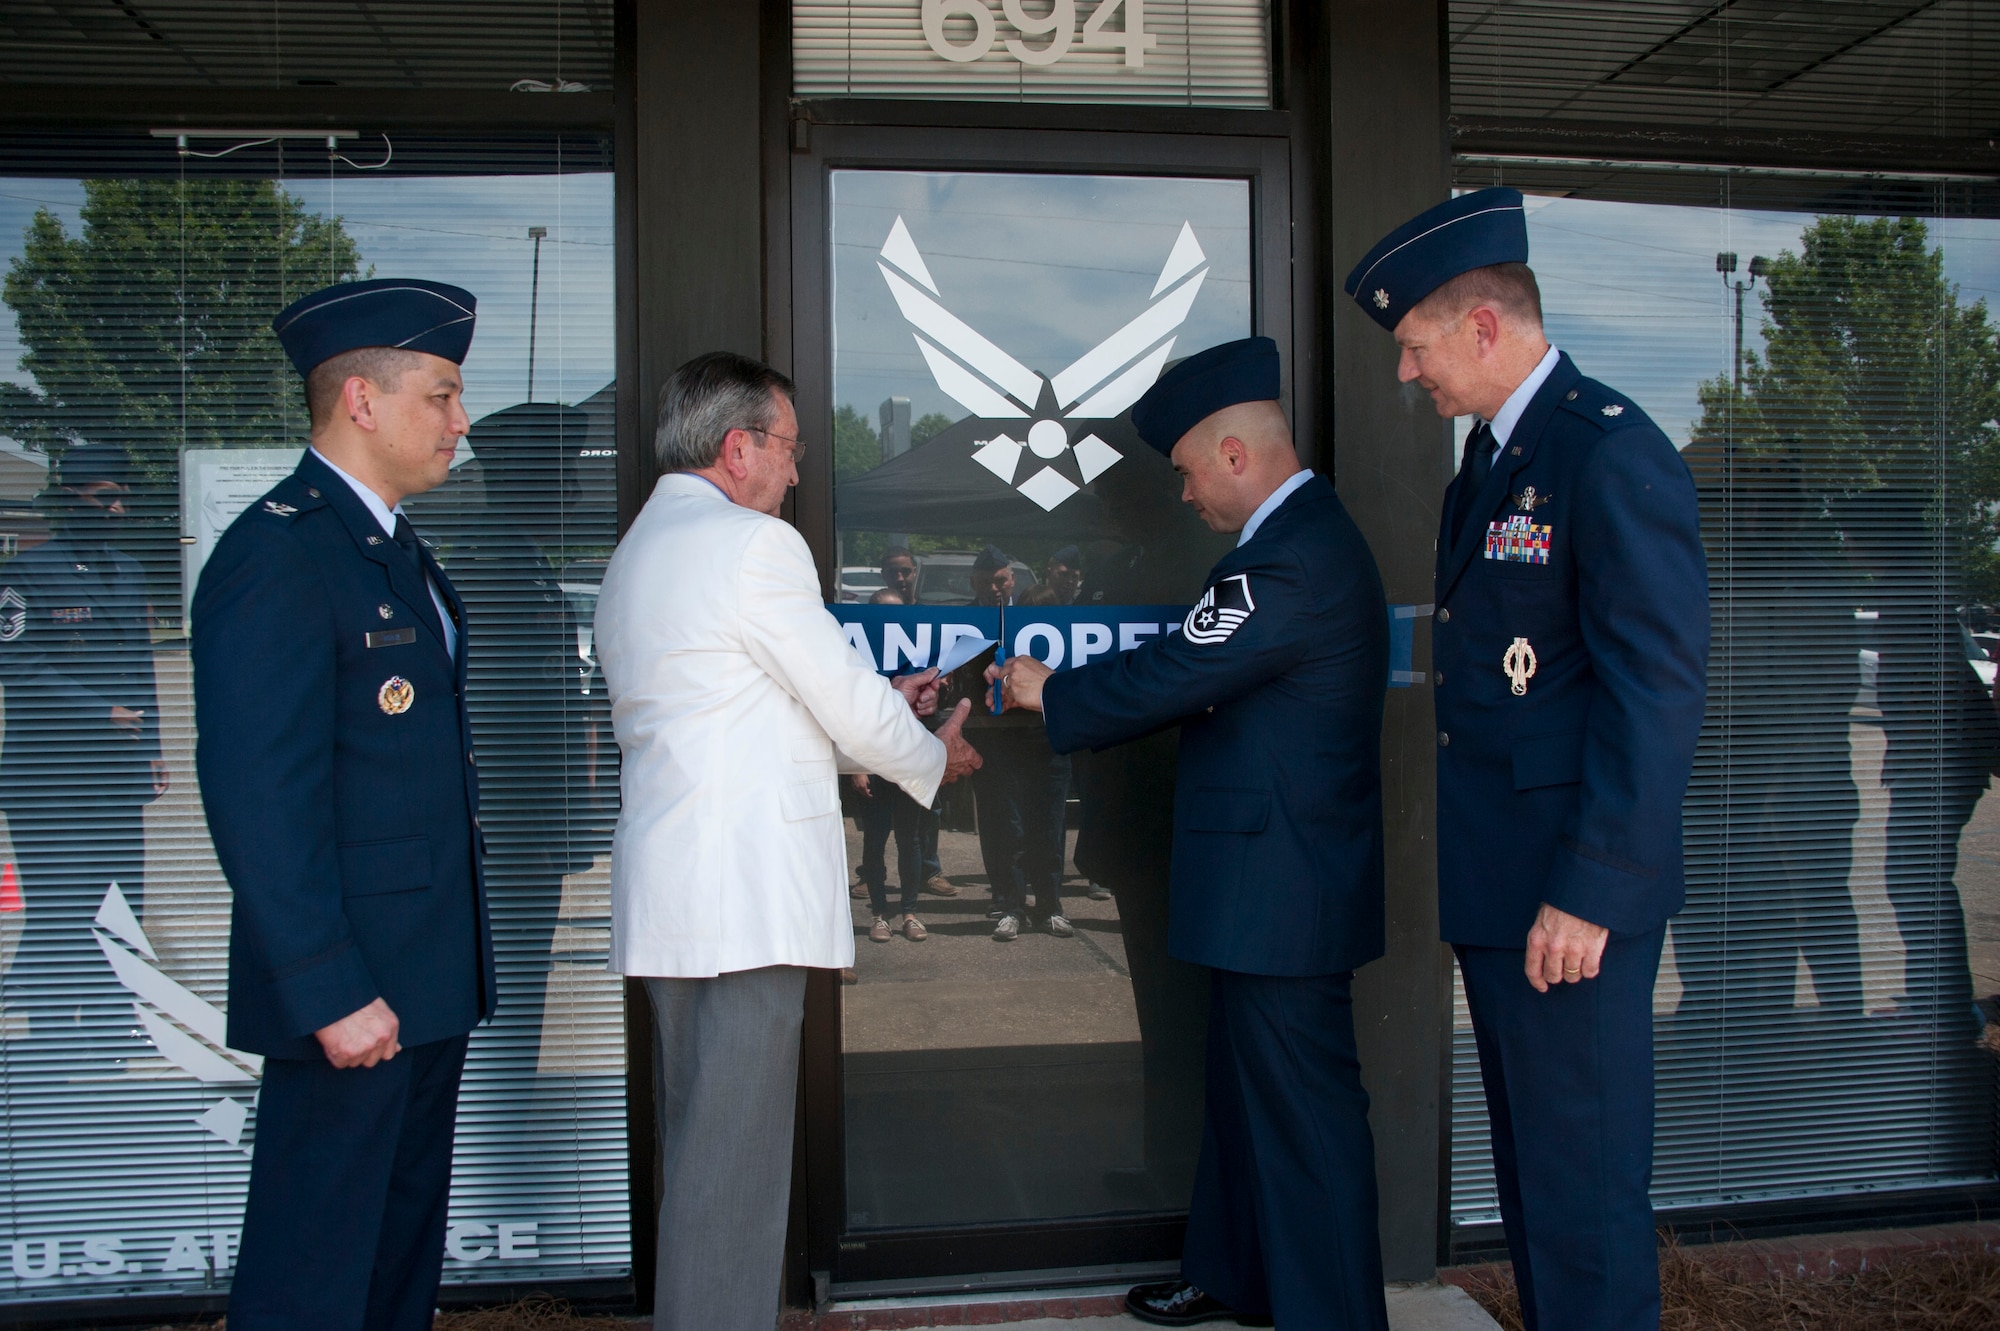 Master Sgt. Jeffrey Storman, A-Flight chief, middle right, and Rick Plaskett, Montgomery Area Chamber of Commerce Defense Technology Development director, middle left, cut the ribbon during the grand opening ceremony of the new flight-centric recruiting office May 13, 2015, Prattville, Alabama. Also attending the ceremony were Col. Robert Borja, 369th Recruiting Group commander, left, and Lt. Col. Johnathan Austin, 331st Recruiting Squadron commander. In an effort to share manpower and resources, the new facility will combine three offices into one. (U.S Air Force photo by Bud Hancock/Cleared)